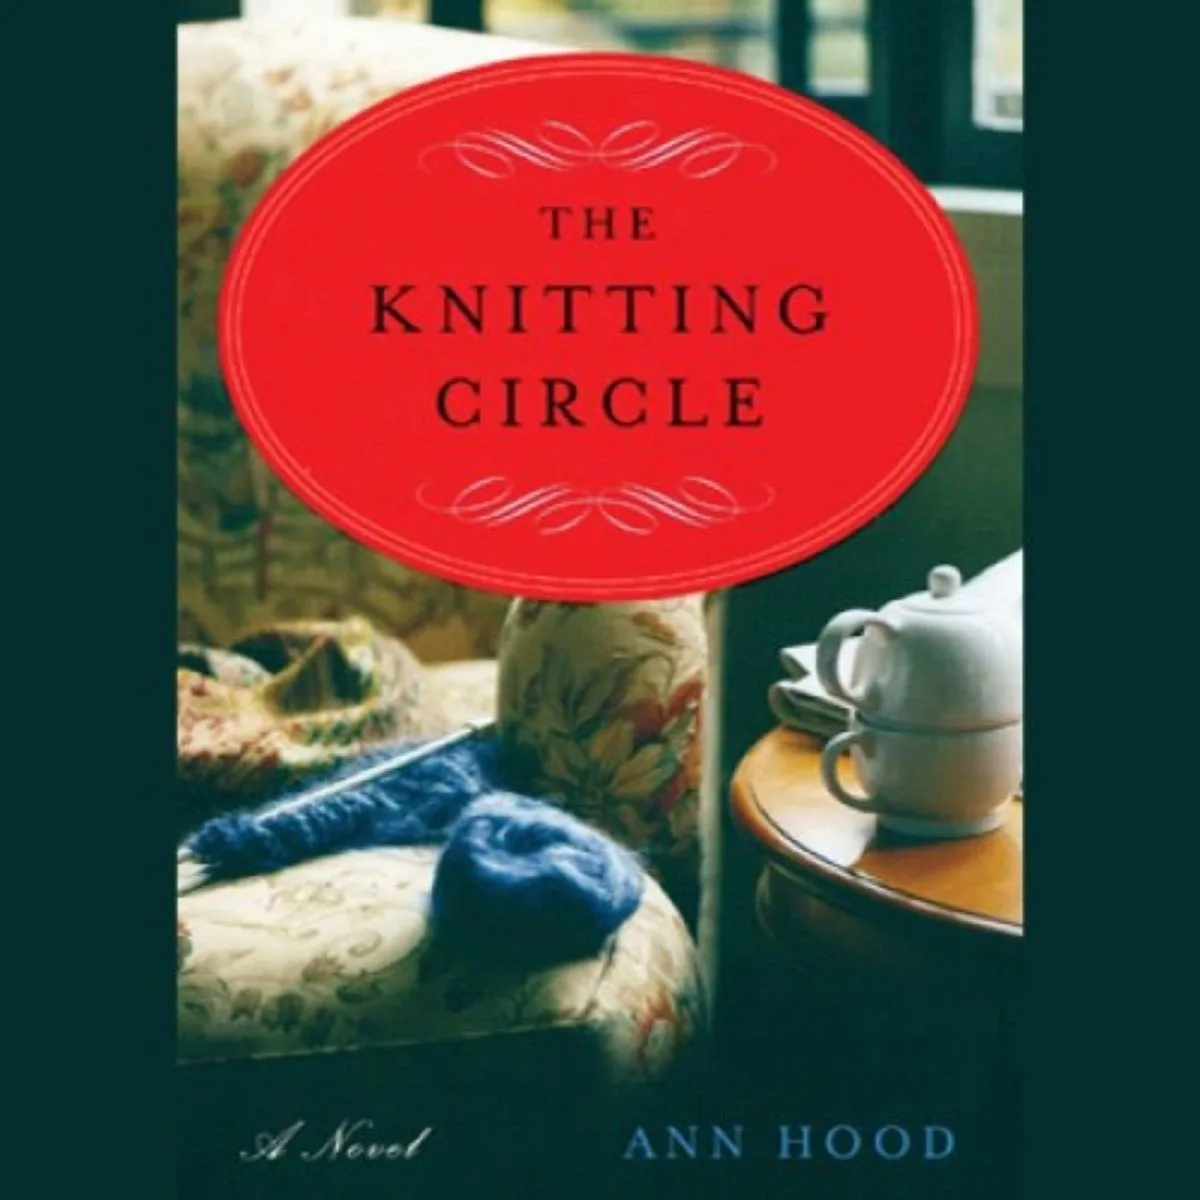 The Knitting Circle book is a book to listen to while crocheting